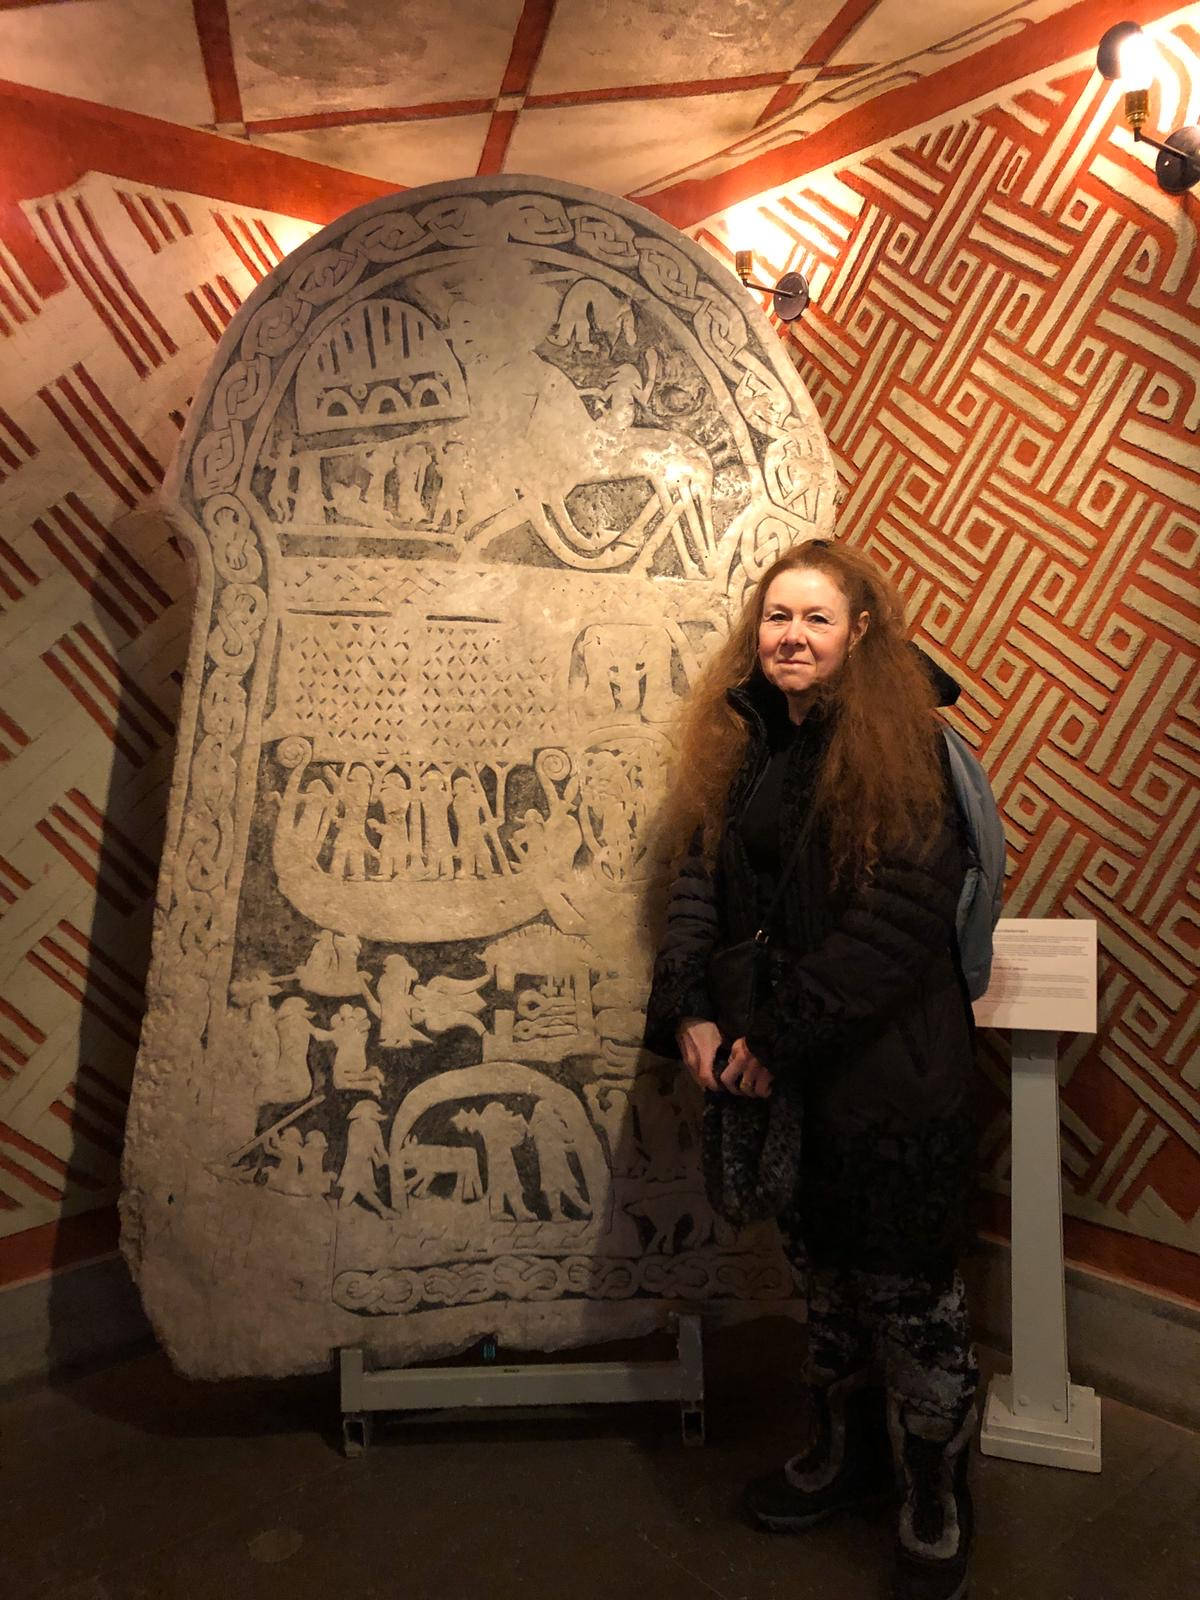 image shows: Viking Research: Me standing next to a rune stone